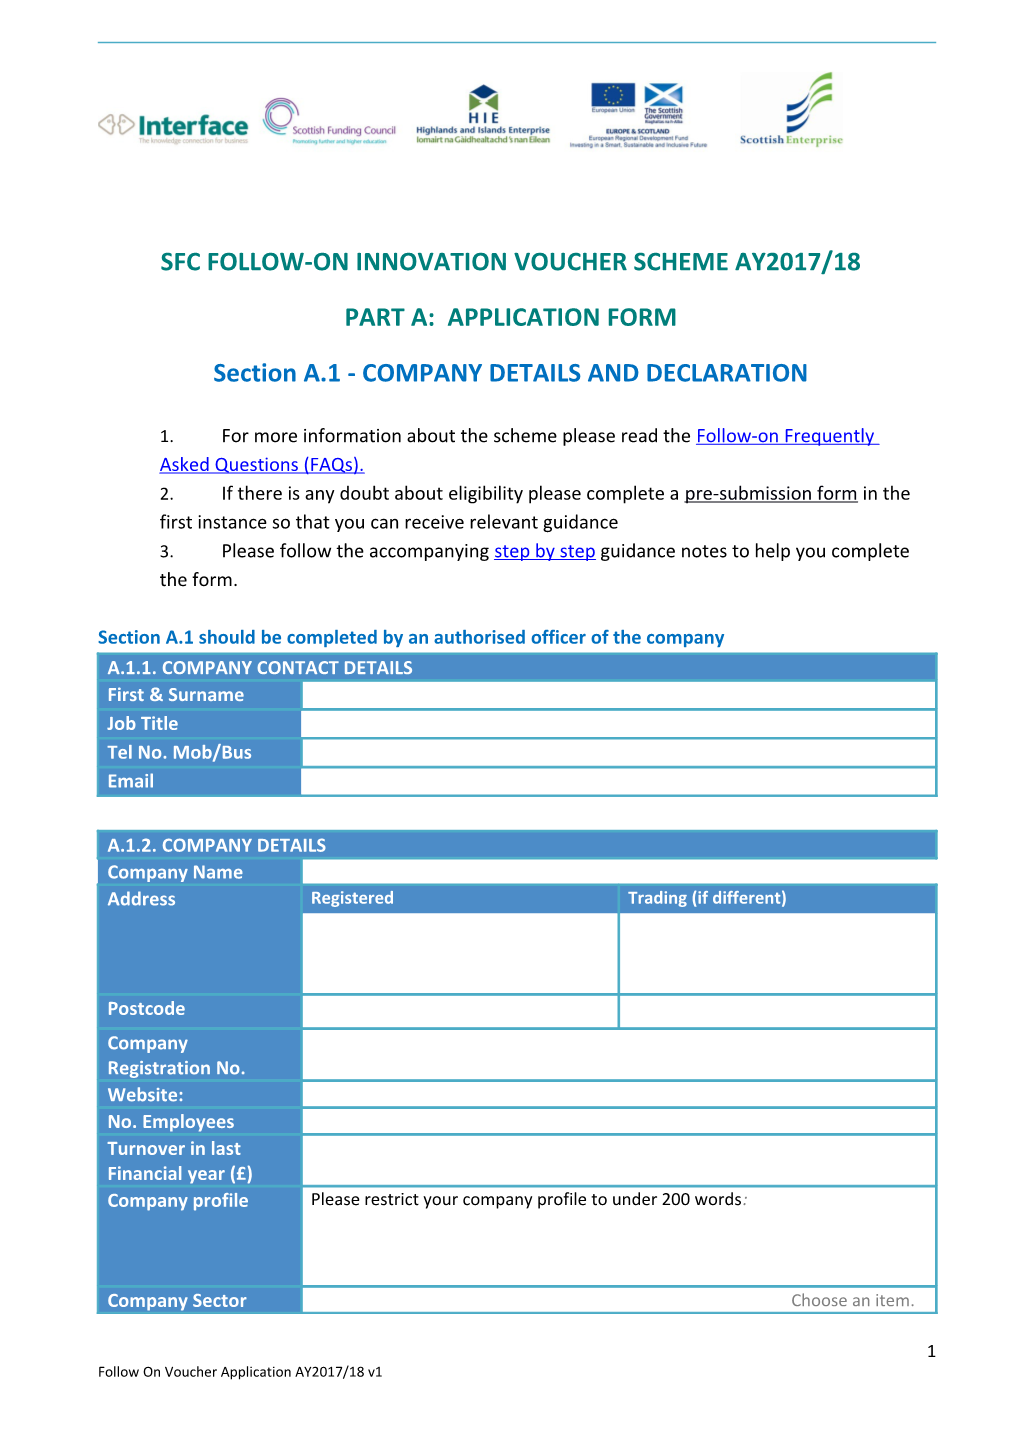 SFC Innovation Voucher Application 2014-15 DRAFT GB Comments